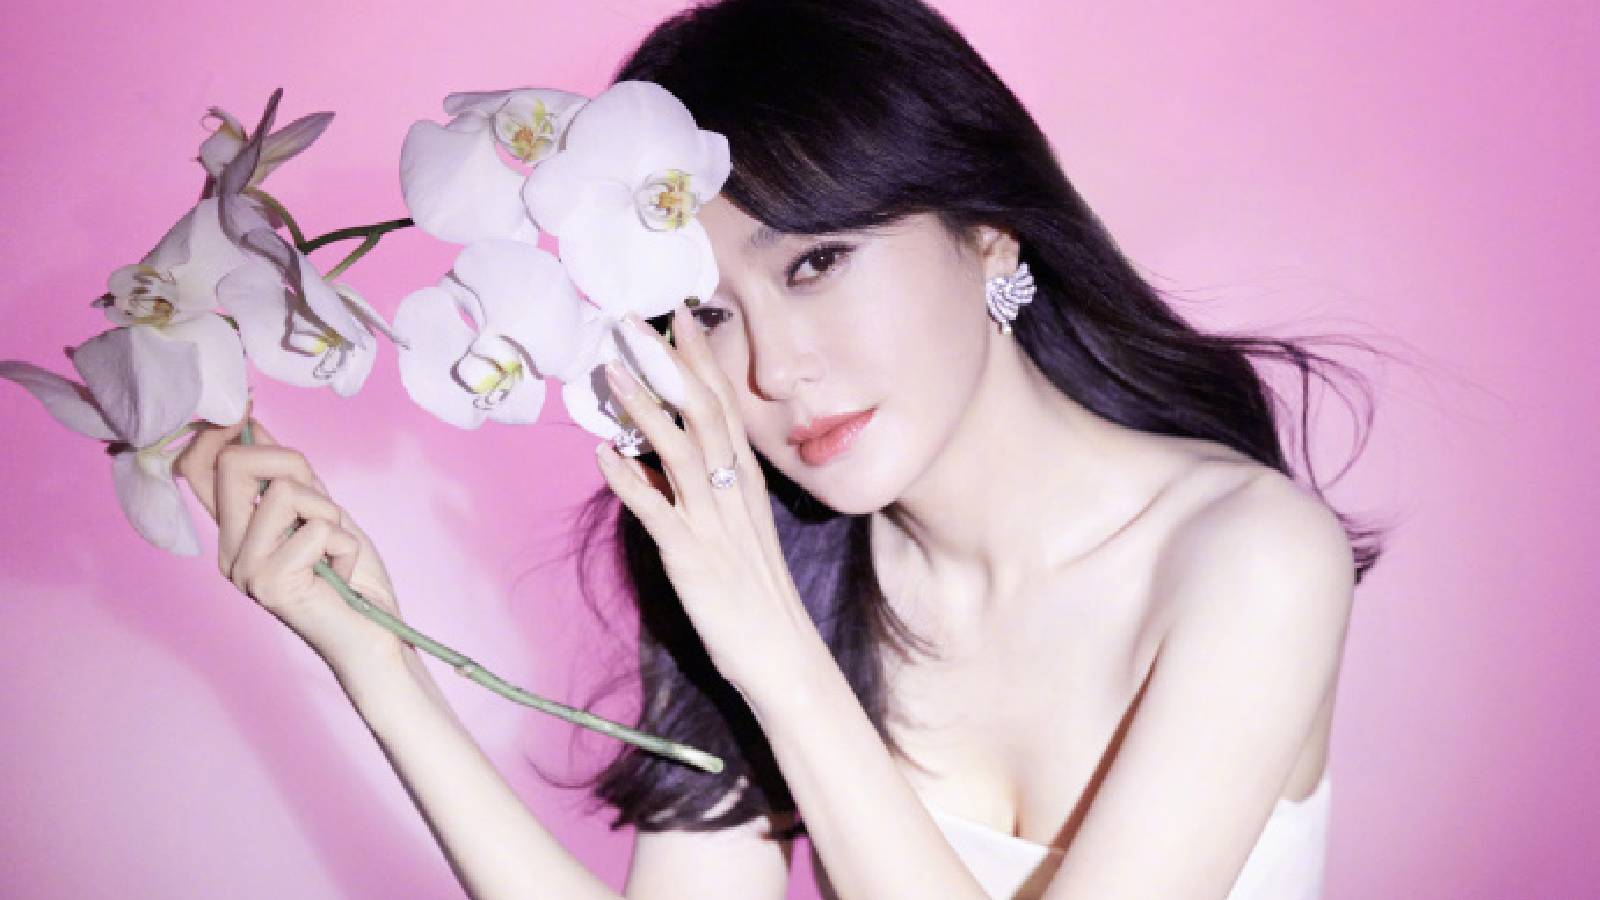 Qin Lan, 41, Says She Didn’t Get Lead Roles 'Cos "No One Wants To See A Woman Who Is Almost 40 Romancing A Younger Actor"